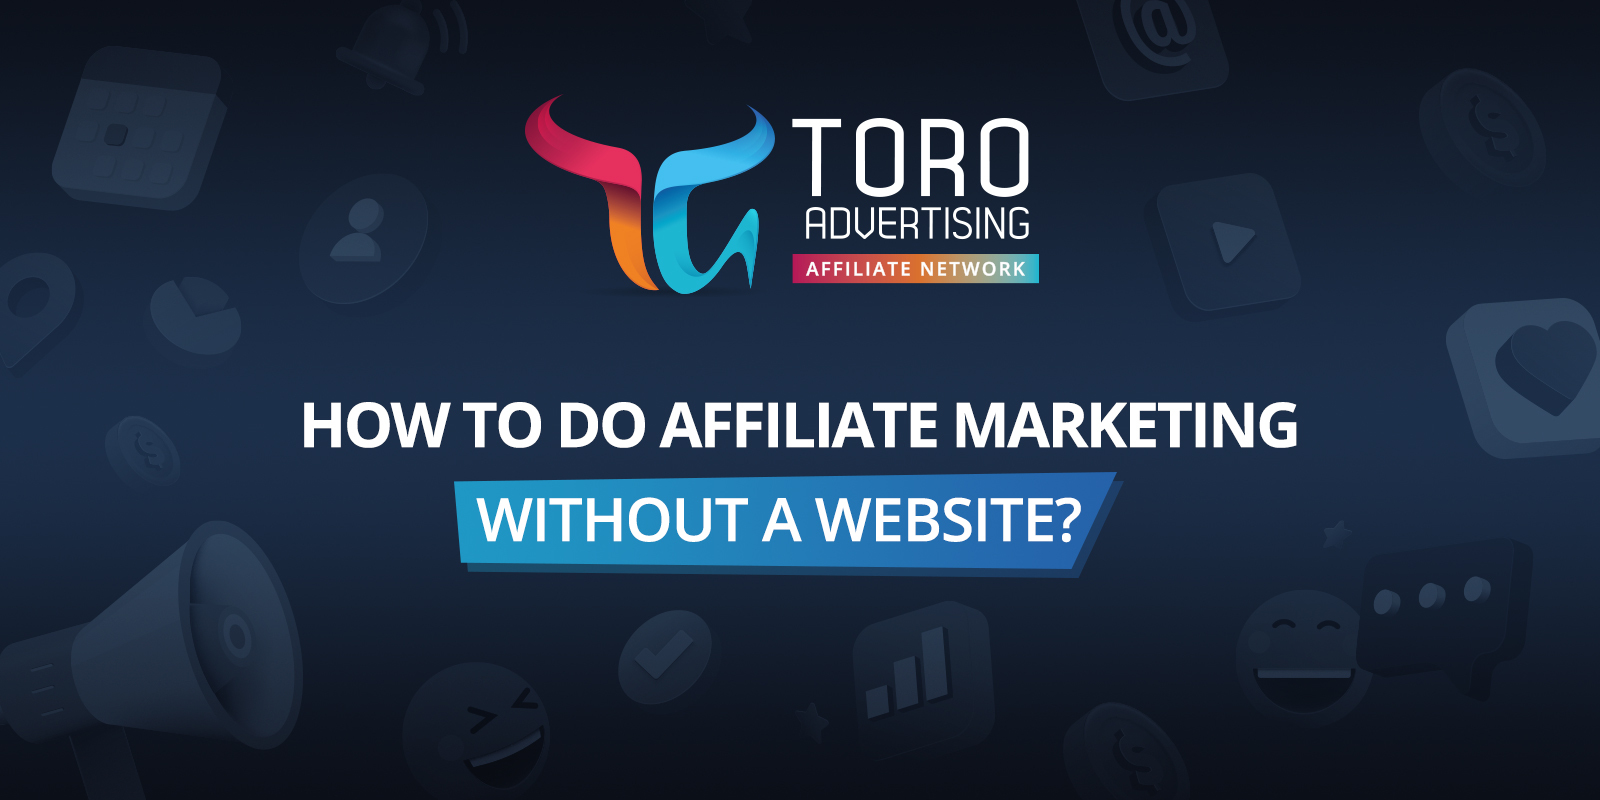 how to do affiliate marketing without a website